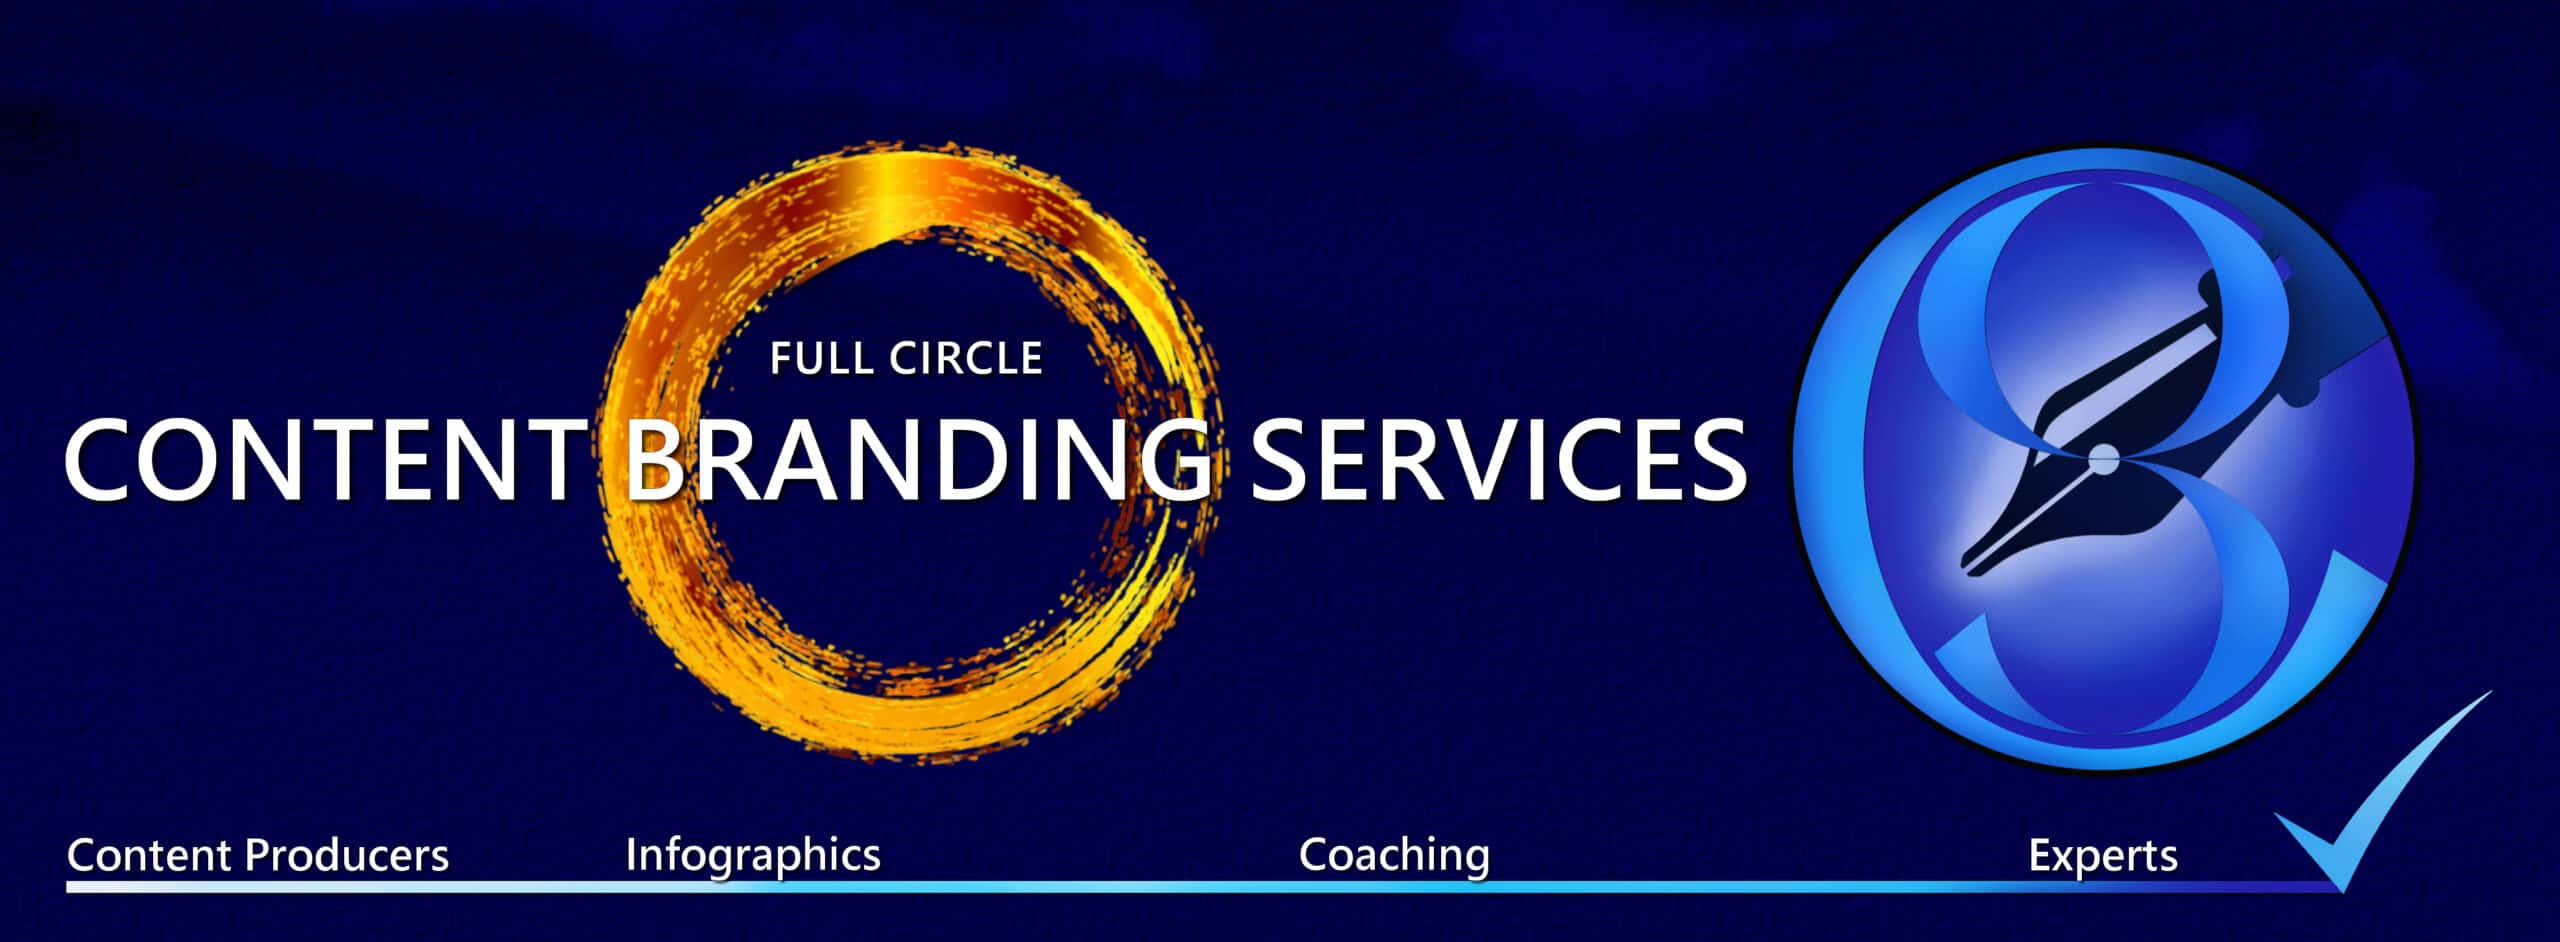 Content Branding Solutions is a digital marketing company specializing in  Full Circle Content Marketing services in Attraction Marketing Services, Brand and Branding Service, Branding Refresh Services, Editorial and Editing Services, Thought Leadership Services, Website Development and Design services, Coaching, Mentoring, Training, and Teaching with Digital Content Marketing Plans for Entrepreneurs, Start ups, Small Businesses, and Professional Practices,   in Denver CO